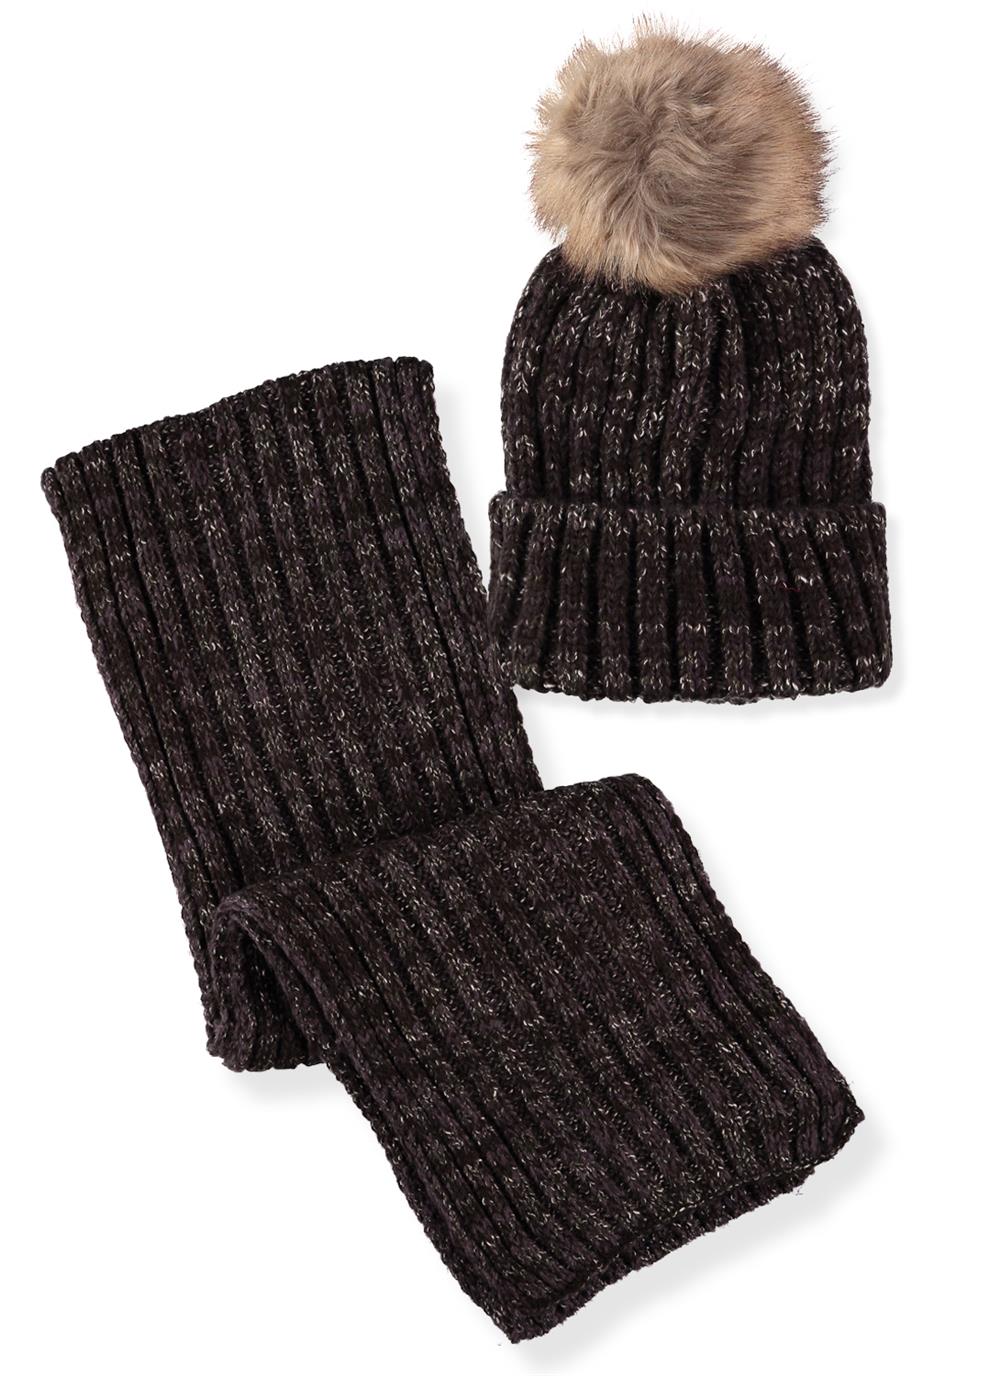 Connex Gear Womens Marled Cable Knit Hat and Scarf 2-Piece Set